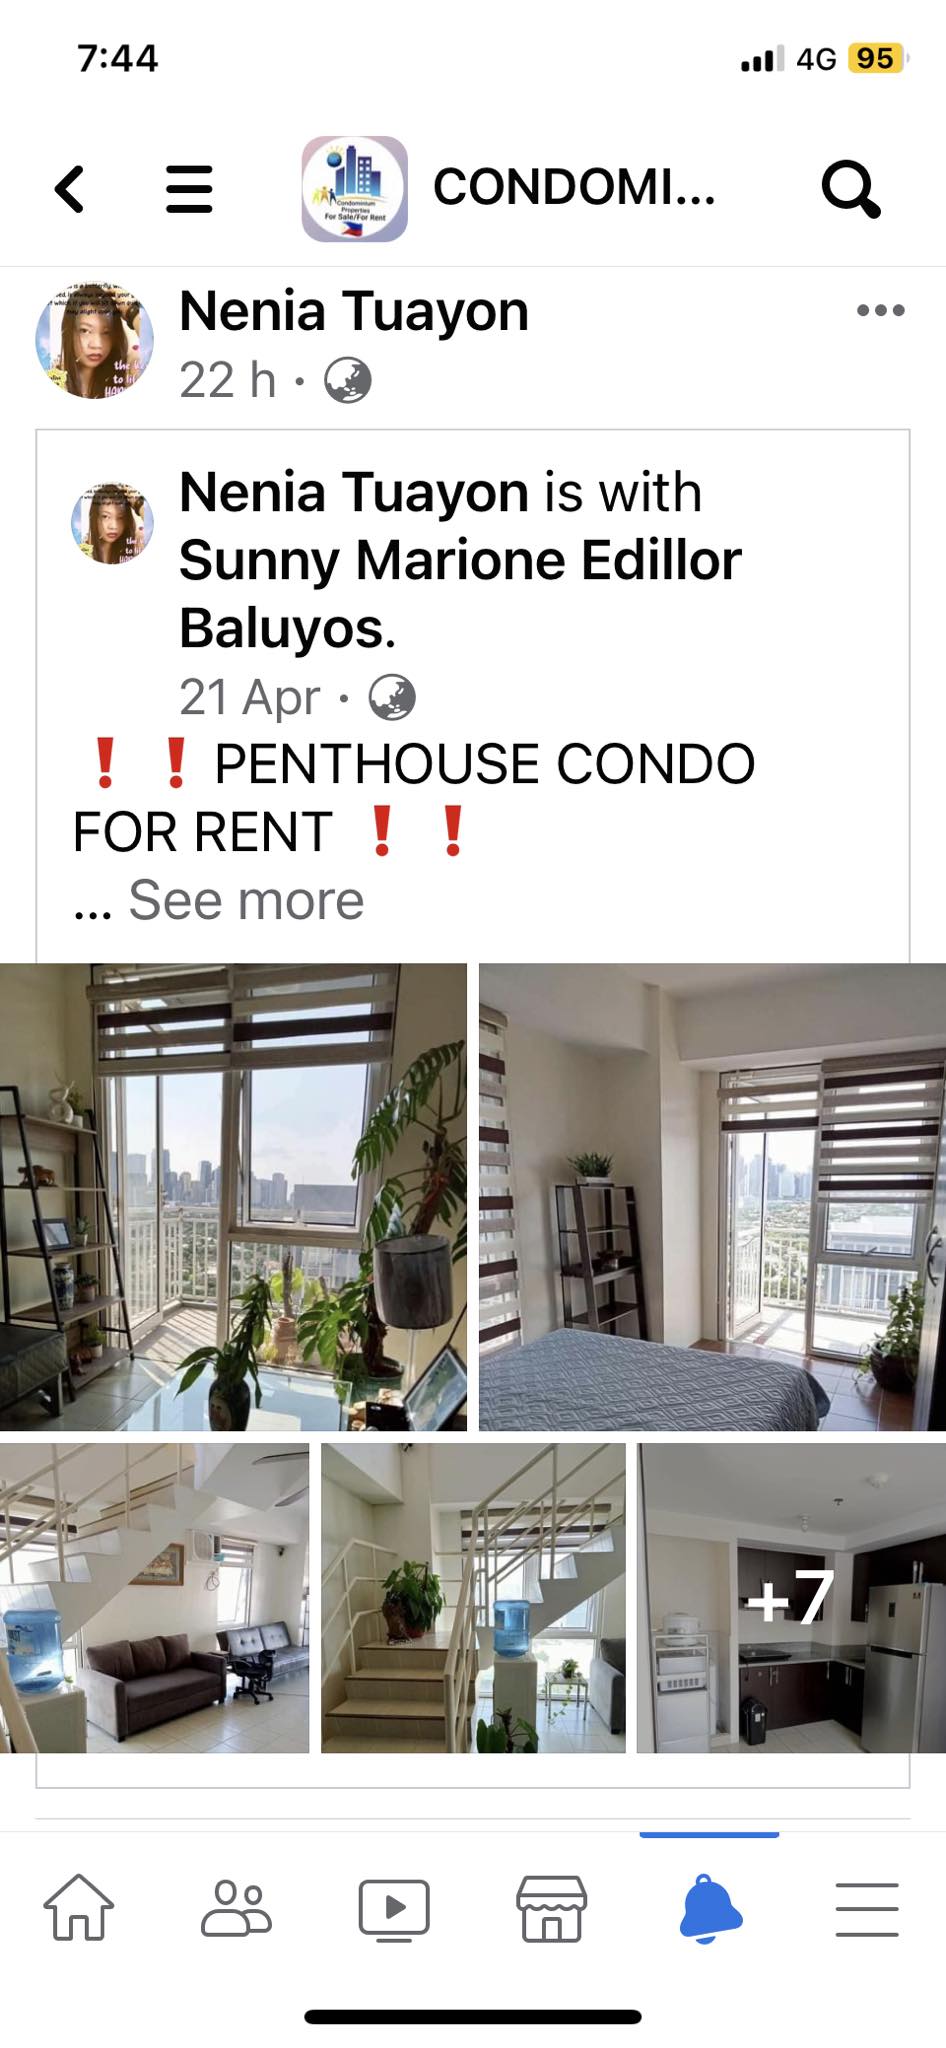 The Penthouse Condo Unit at Pasig City in Manila which is available for Rent!!